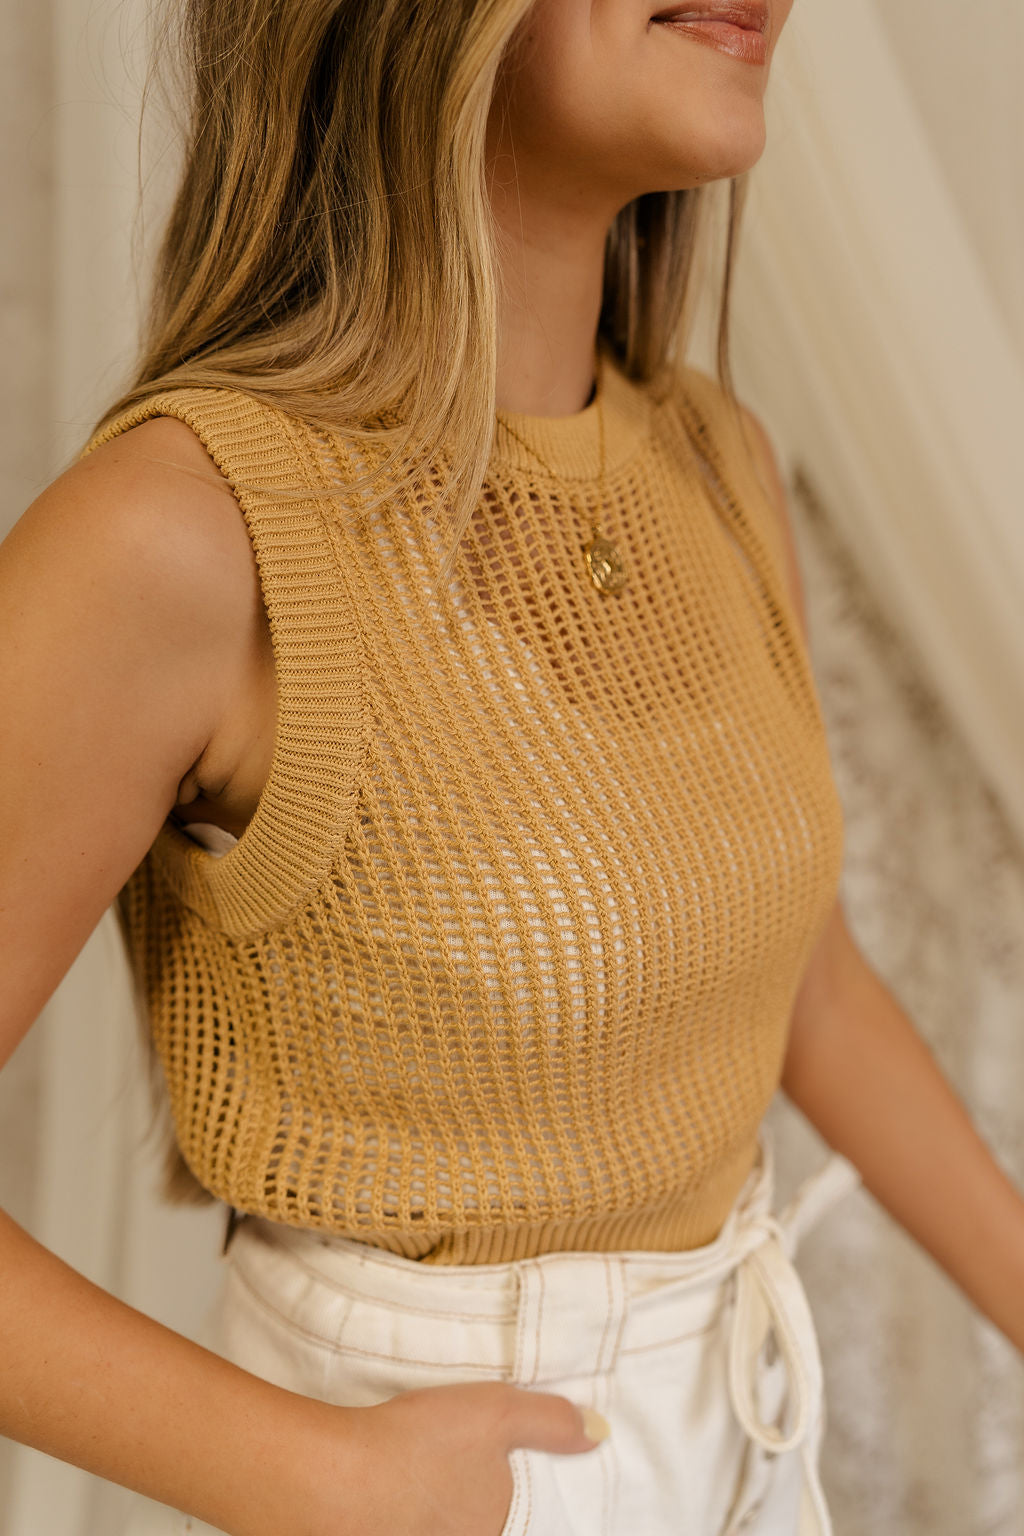 Close side view of model wearing the Heidi Mustard Open Knit Tank which has a round neckline, open knit fabric, and sleeveless body. Layered over white tank top.